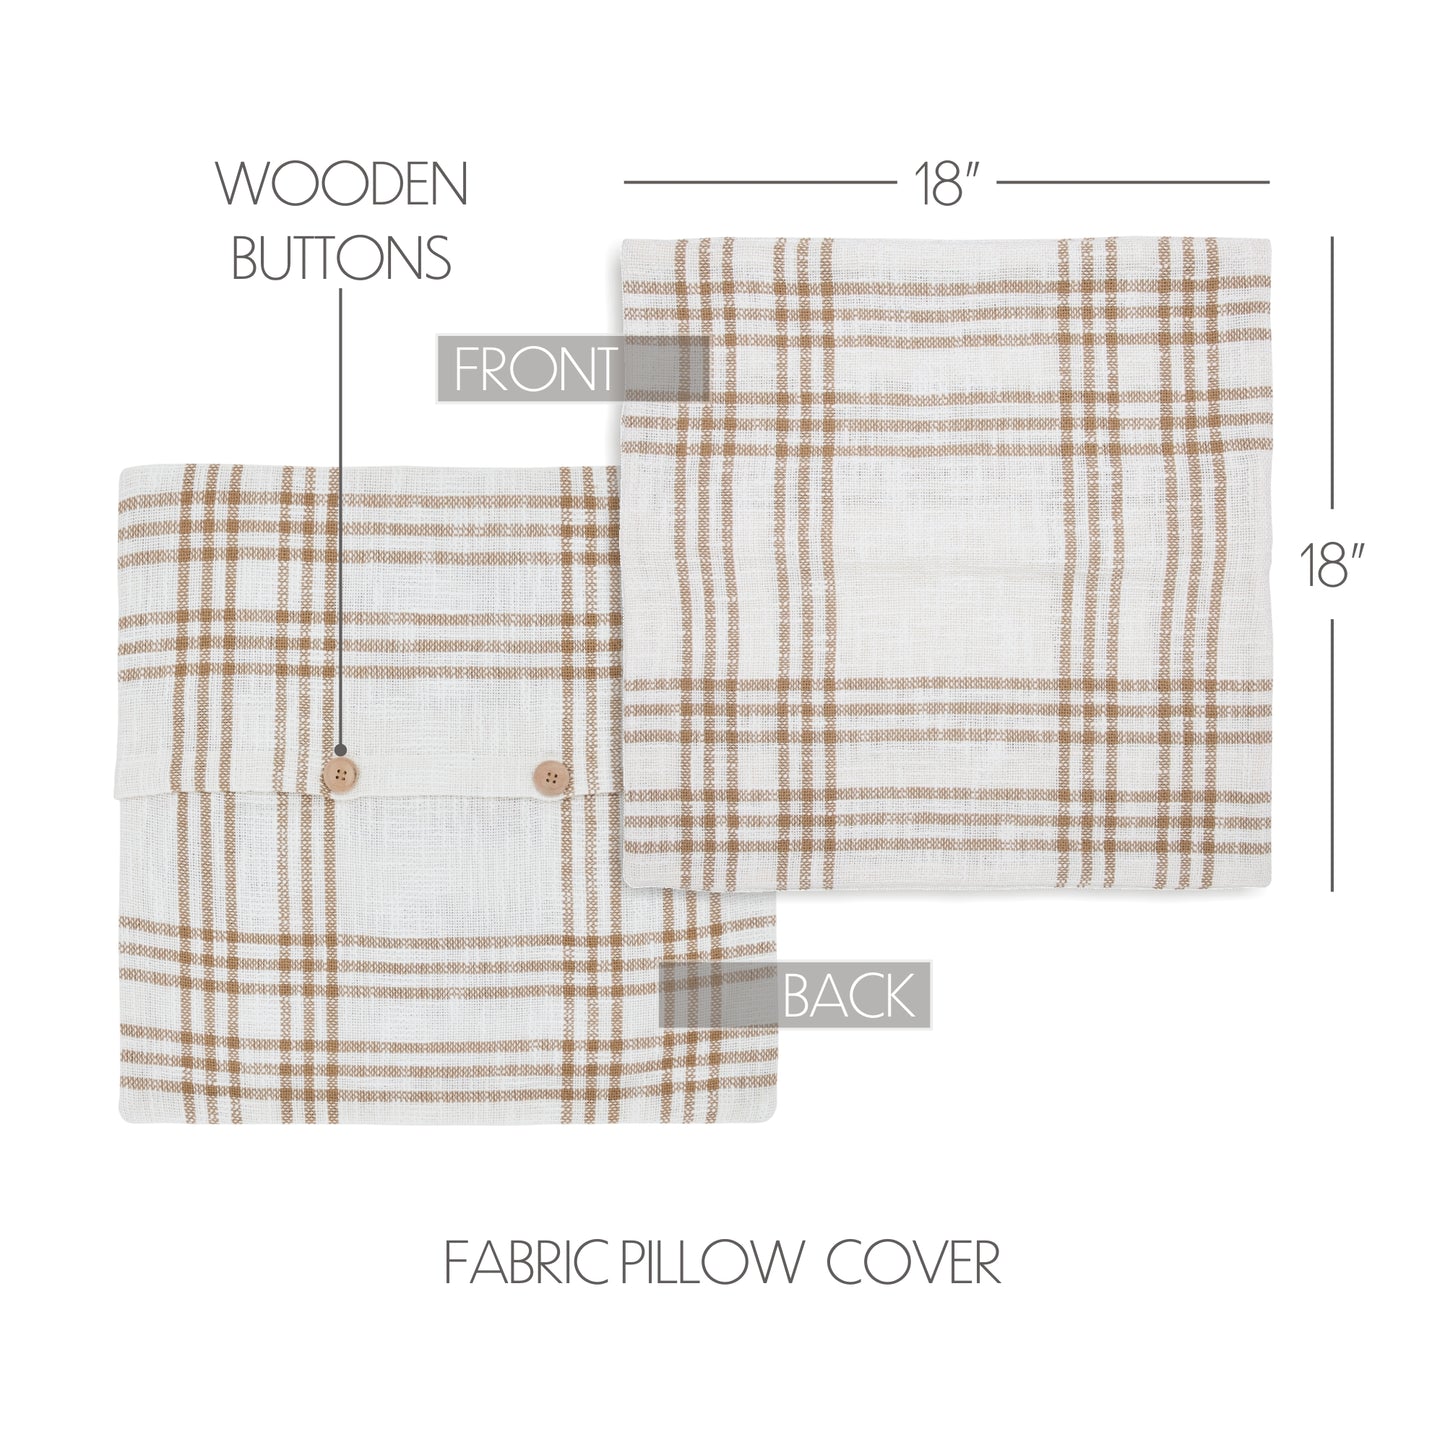 80540-Wheat-Plaid-Fabric-Pillow-Cover-18x18-image-1